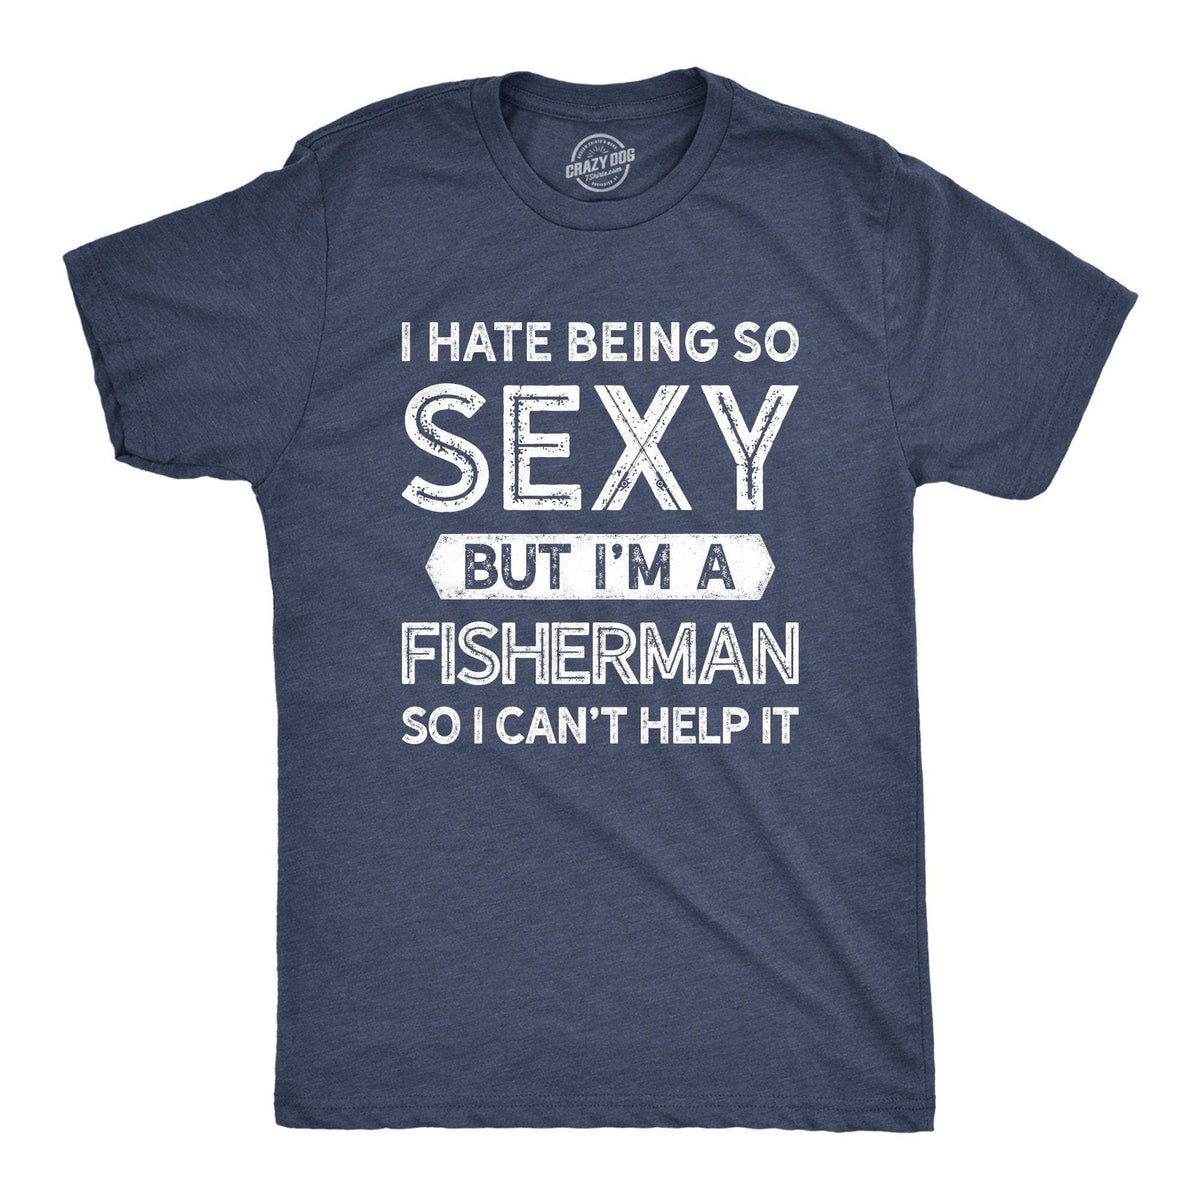 I Hate Being So Sexy But I'm A Fisherman Men's T Shirt - Crazy Dog T-Shirts